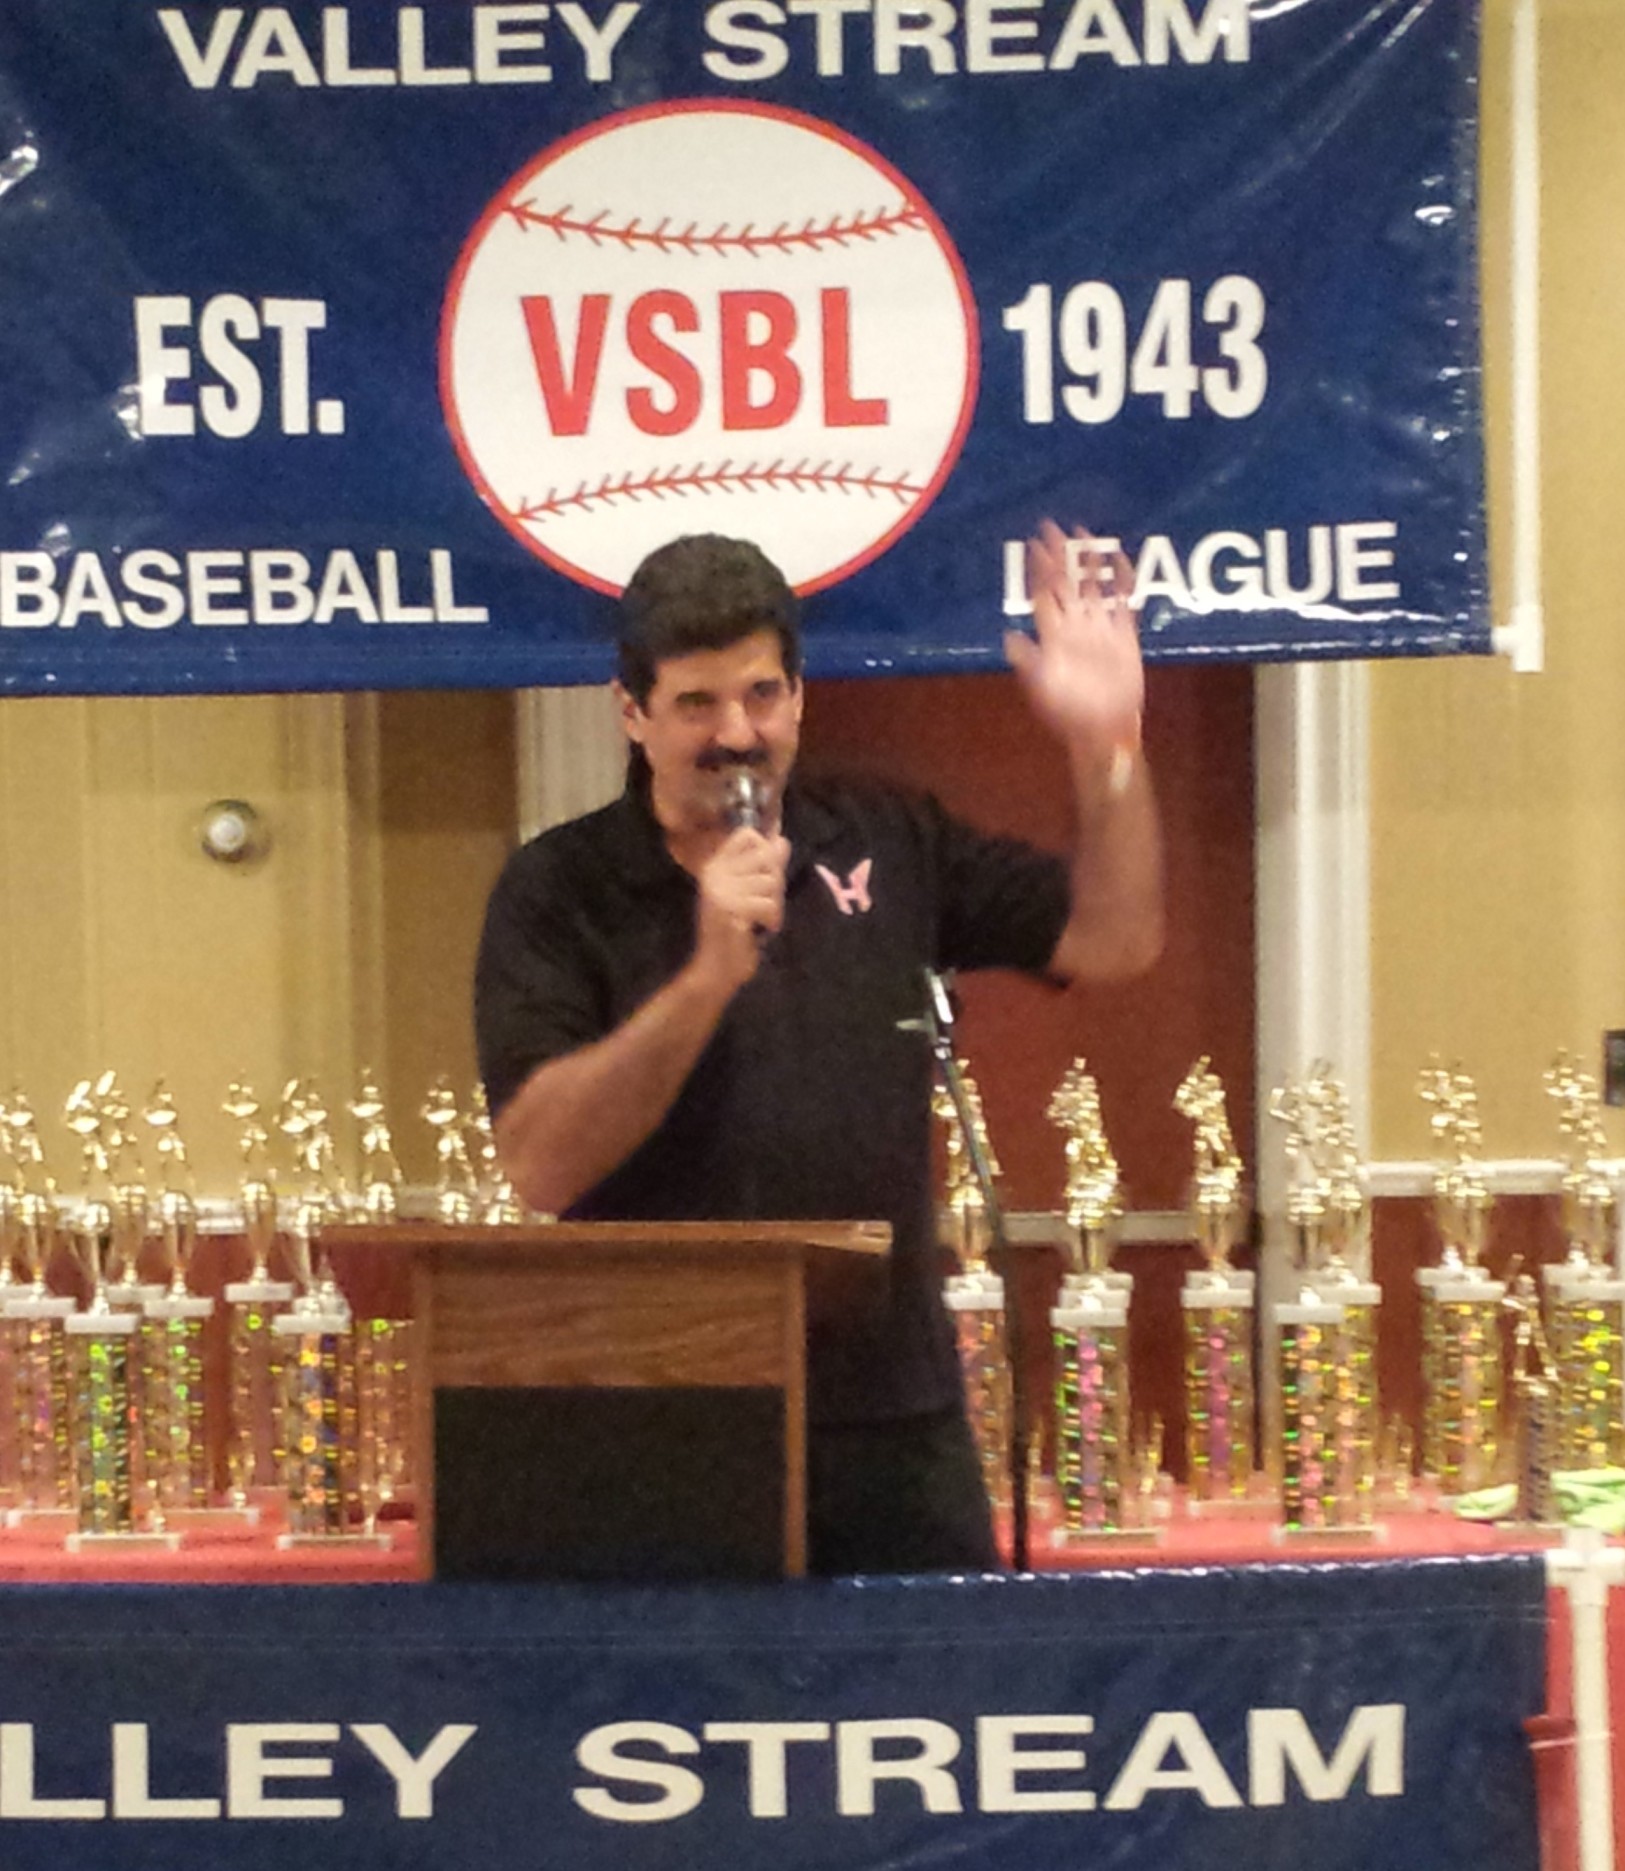 In his speech at the Valley Stream Baseball League award ceremony, Valley Stream Baseball League President Bob Inzerillo thanked the coaches of all the league's teams